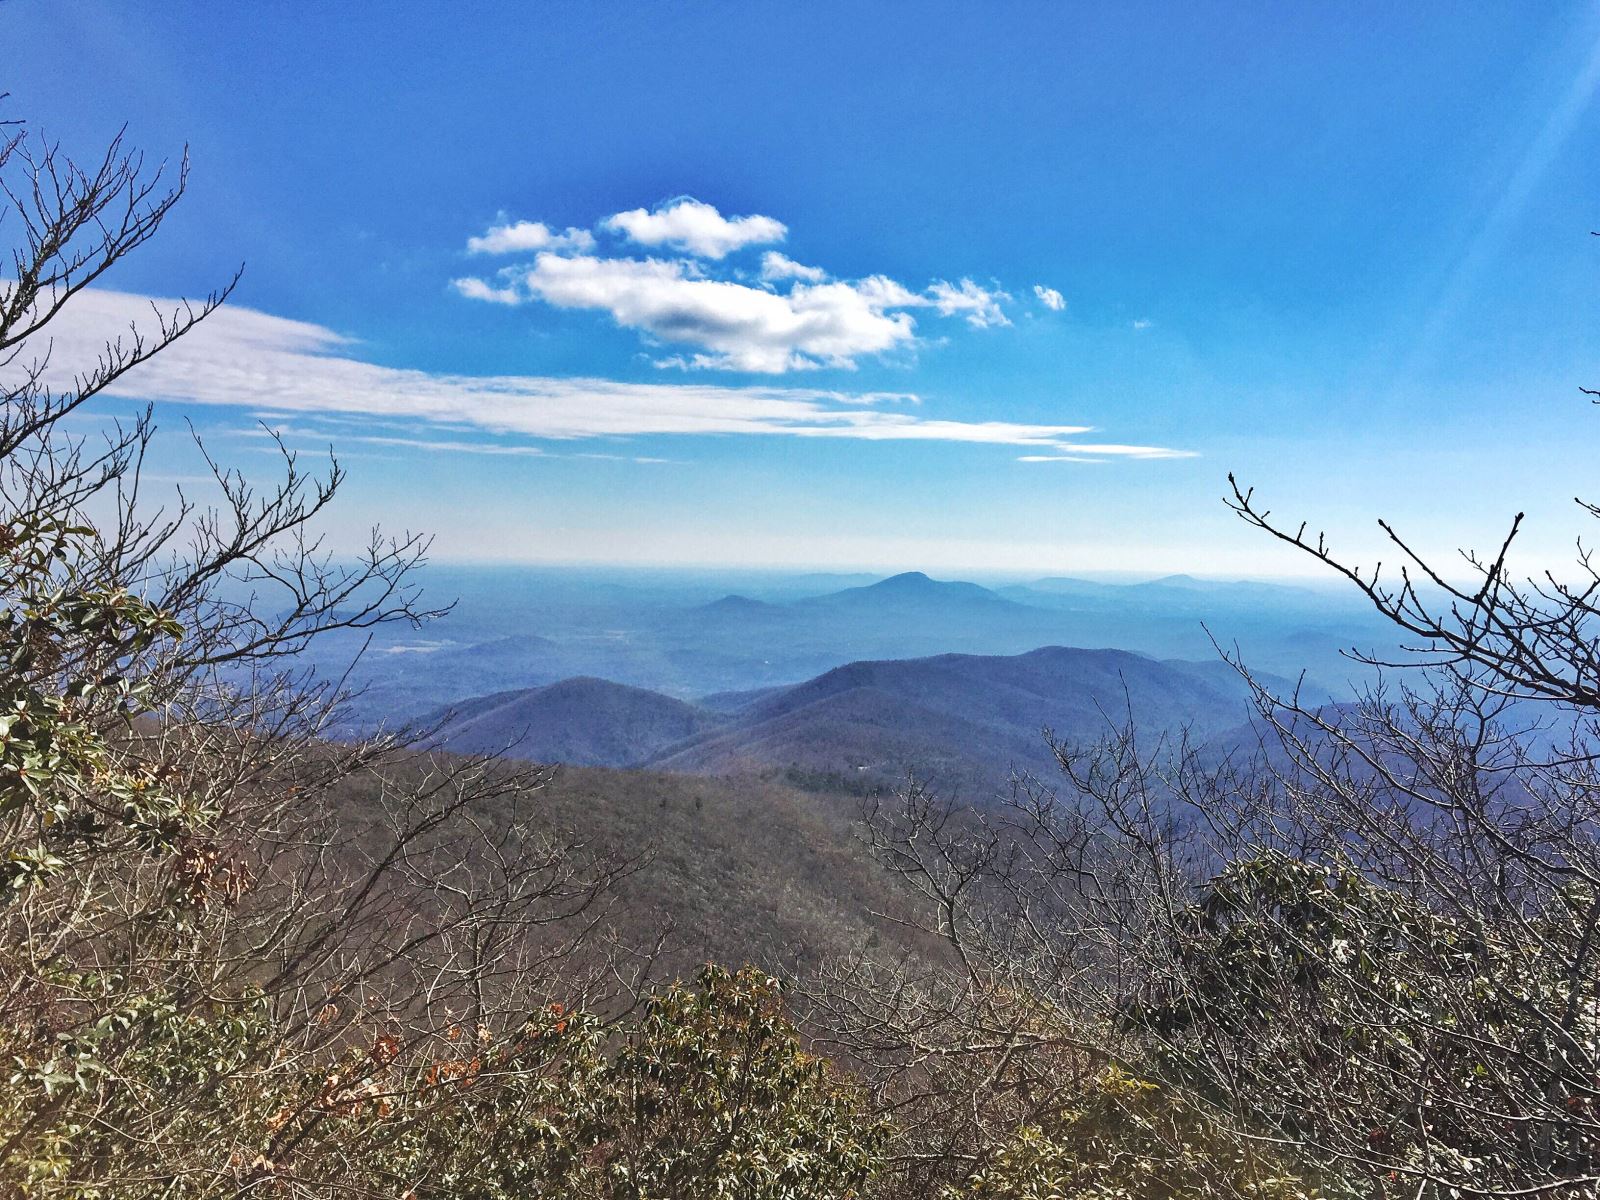 View from the summit on Tray Mountain Rd